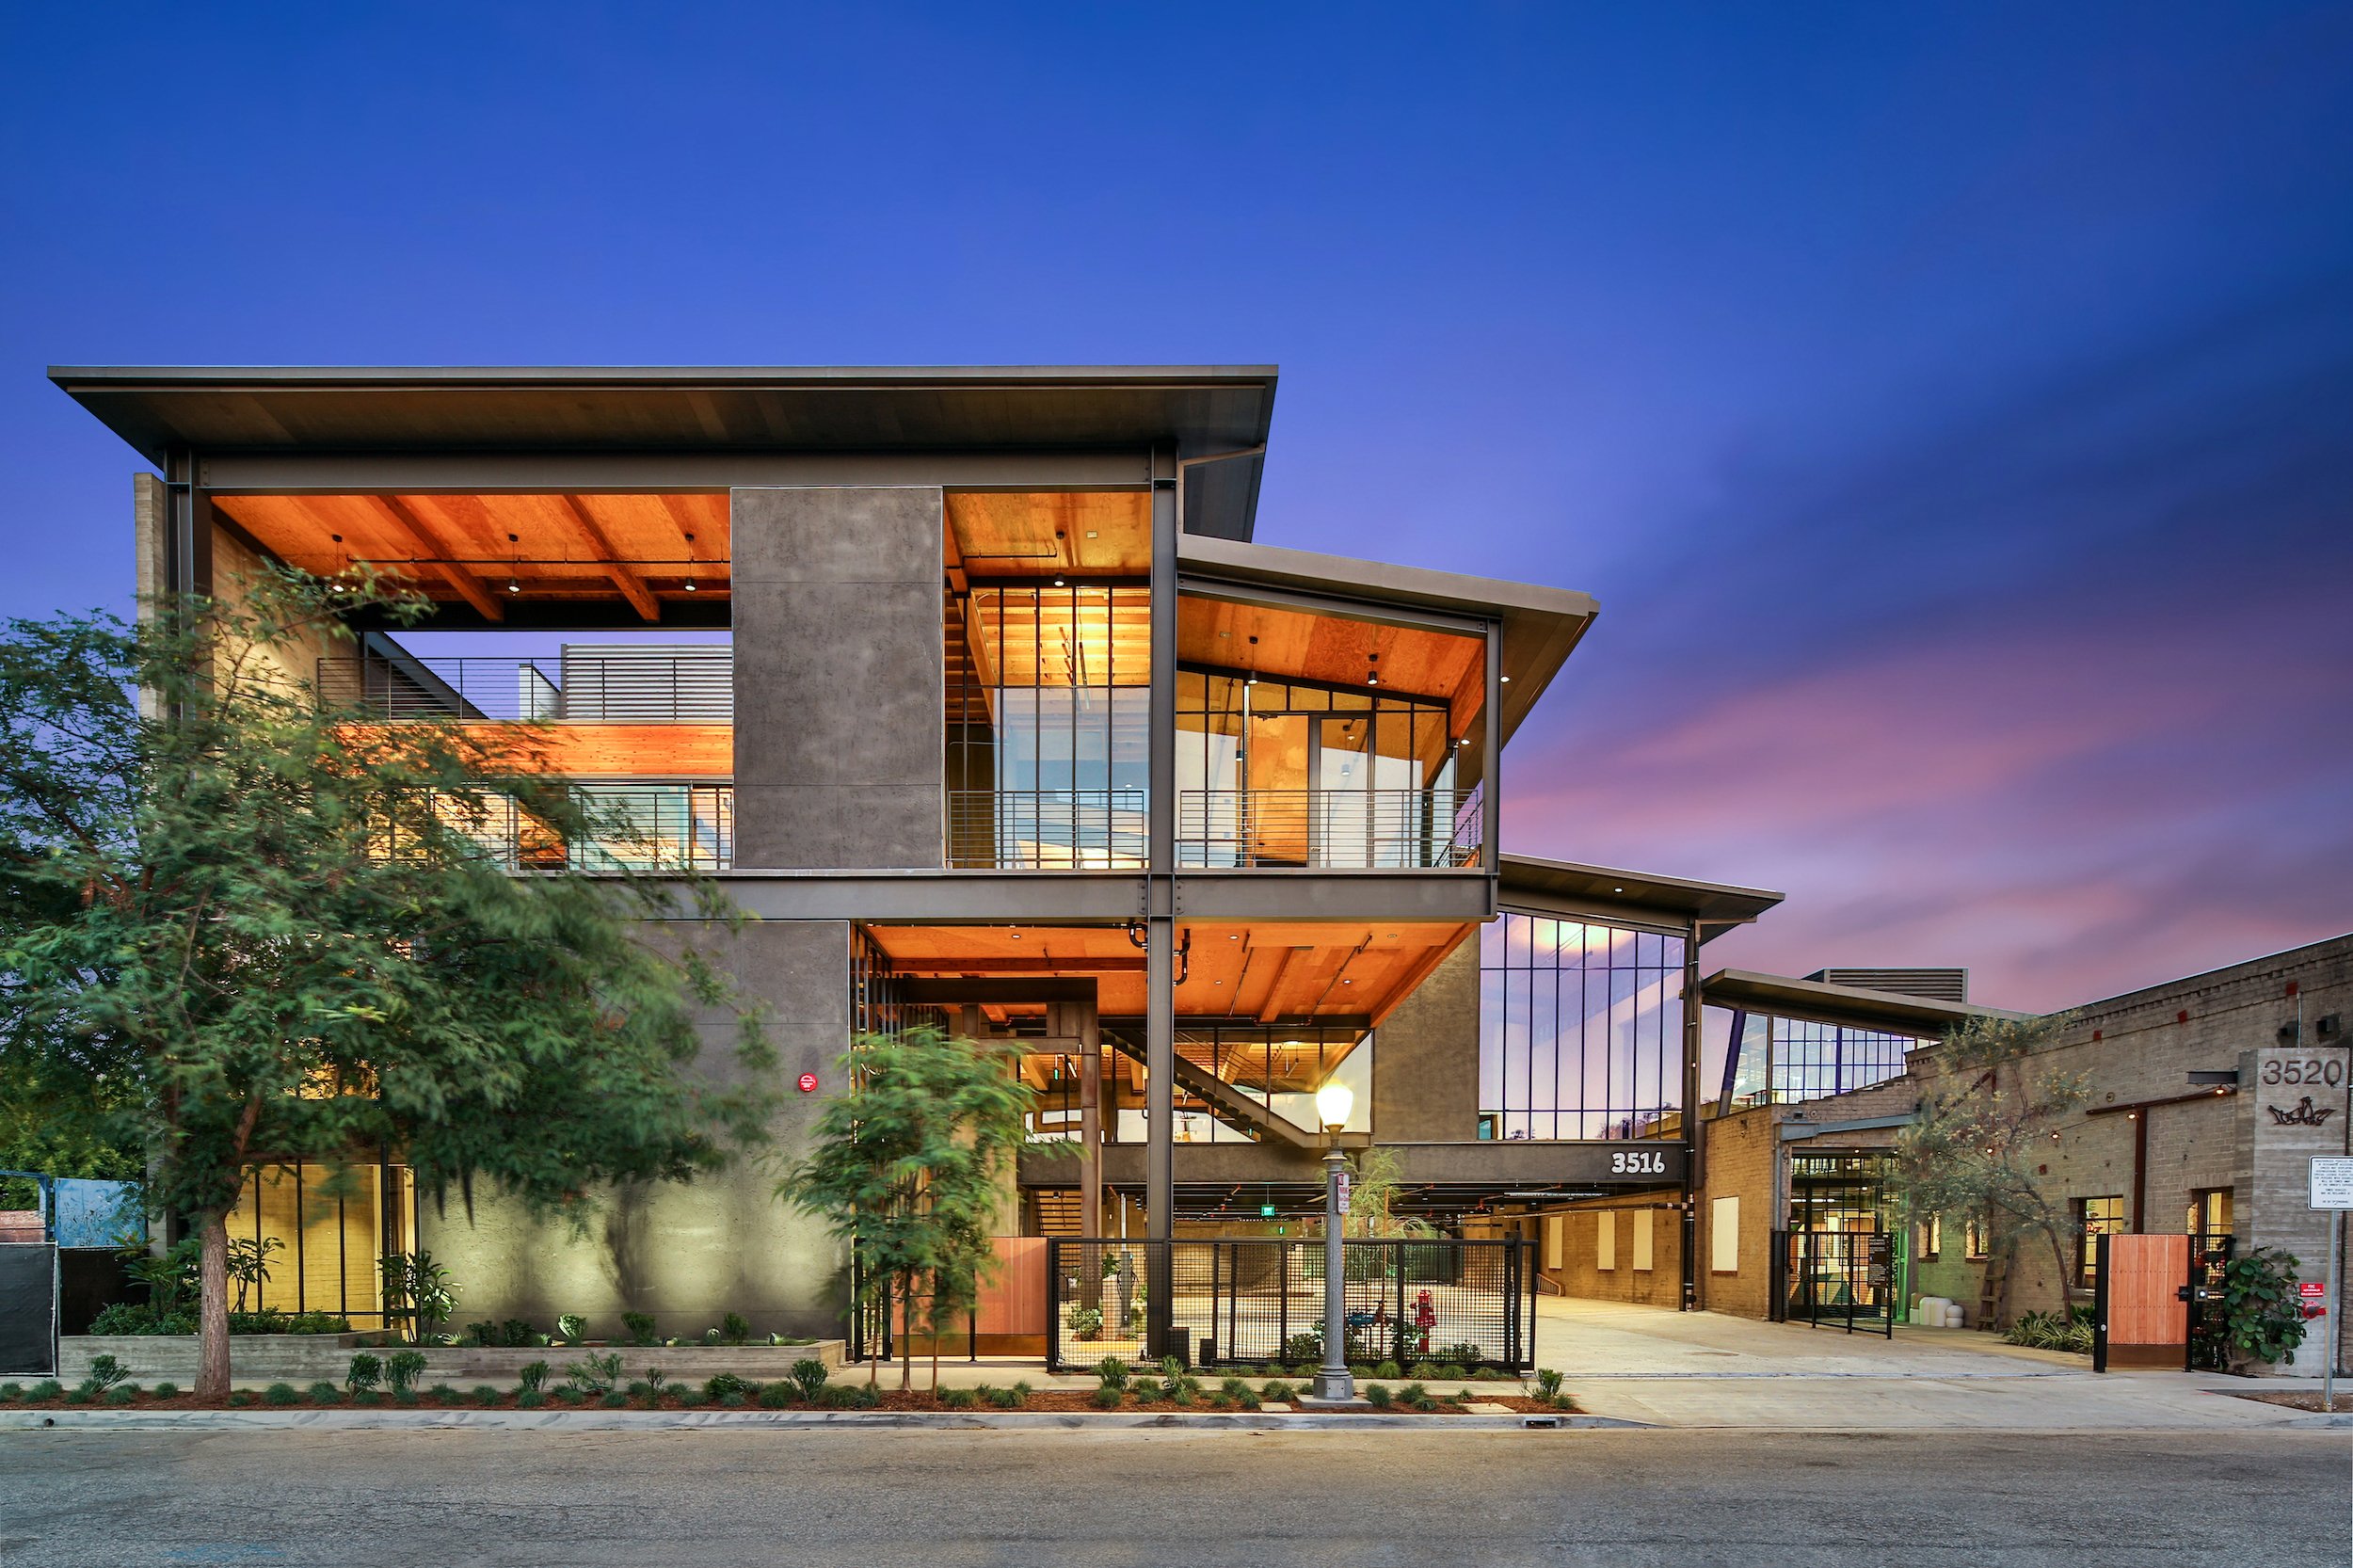 In Southern California, a former industrial zone continues to revitalize with an award-winning office property Photo: Patrick Tang, Take Flyt Imaging